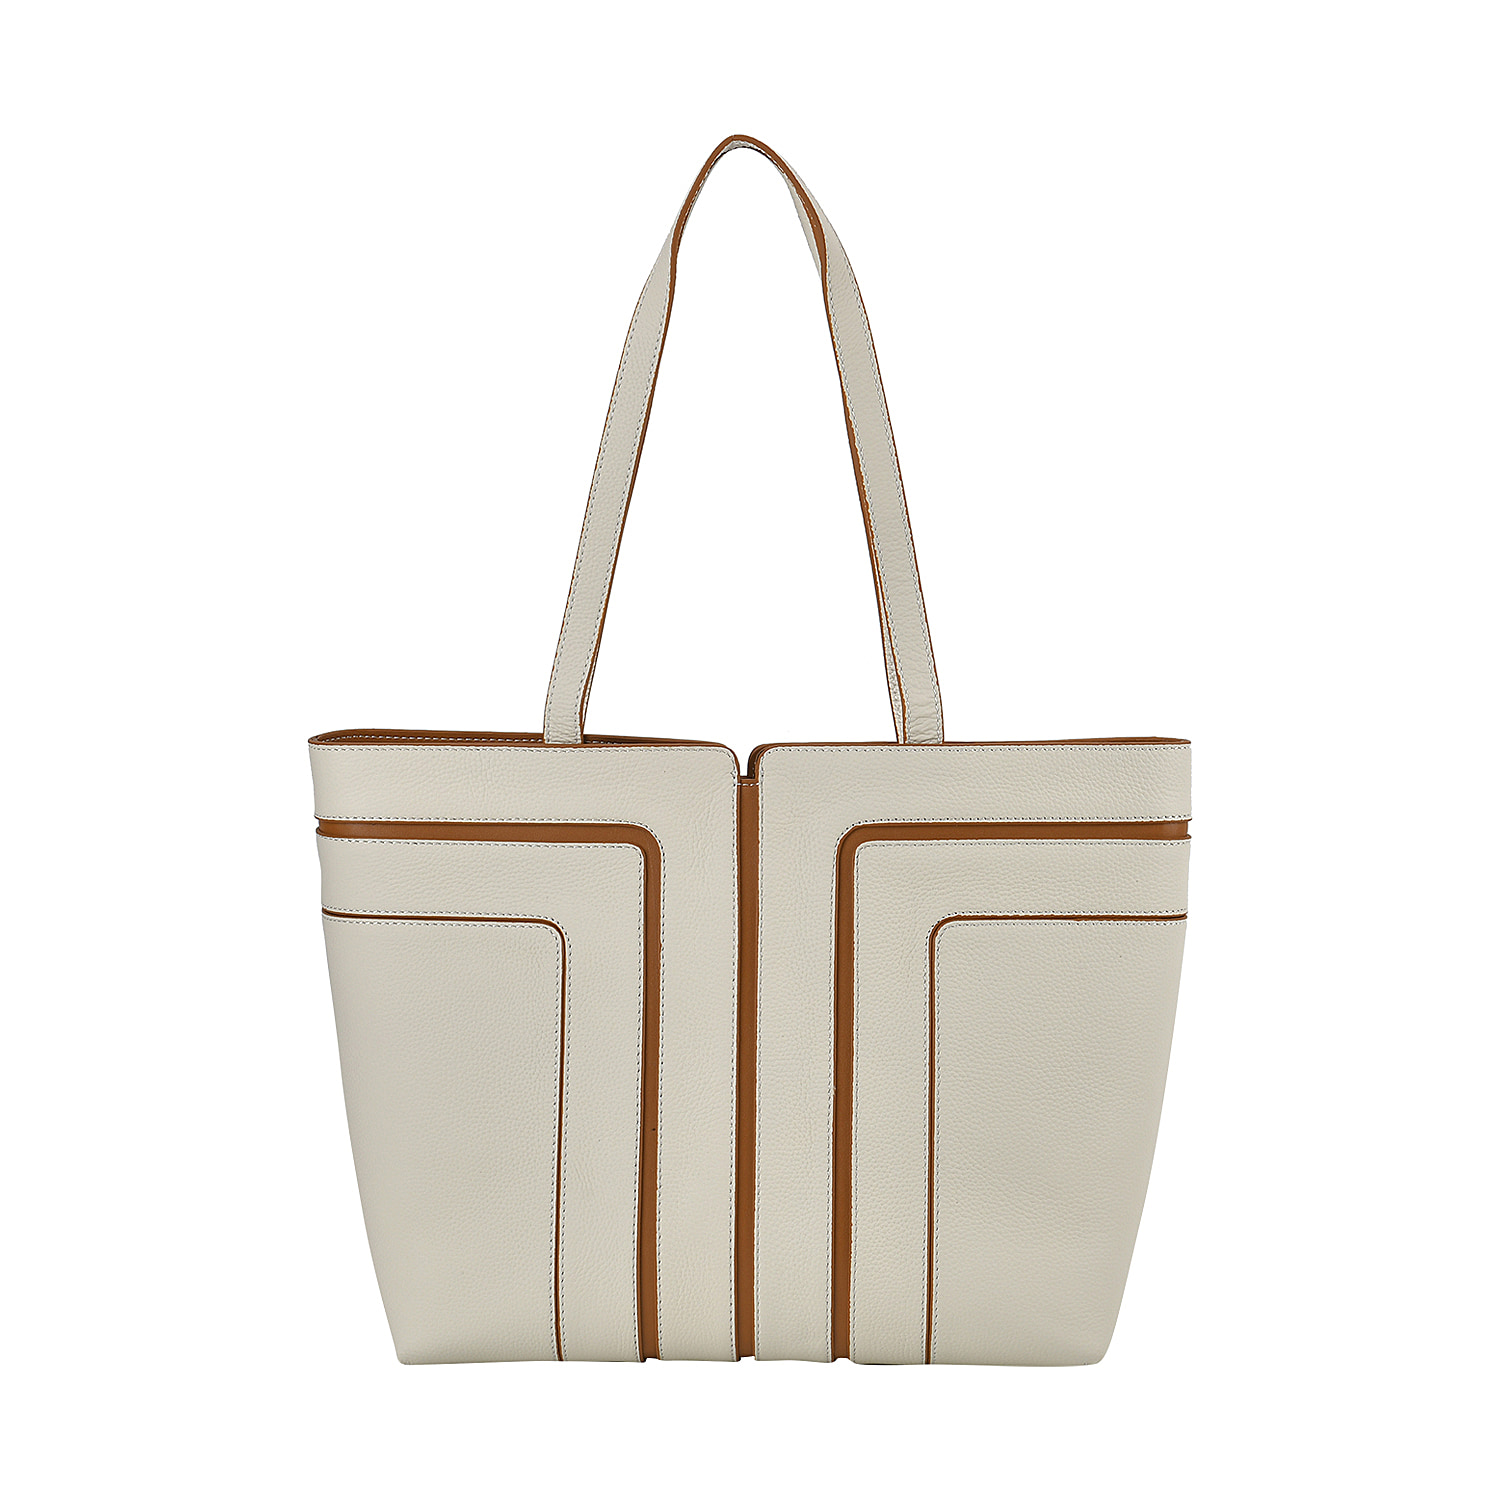 Leather-Patterned-Tote-Bag-Size-32x12x28-cm-Off-White-Black